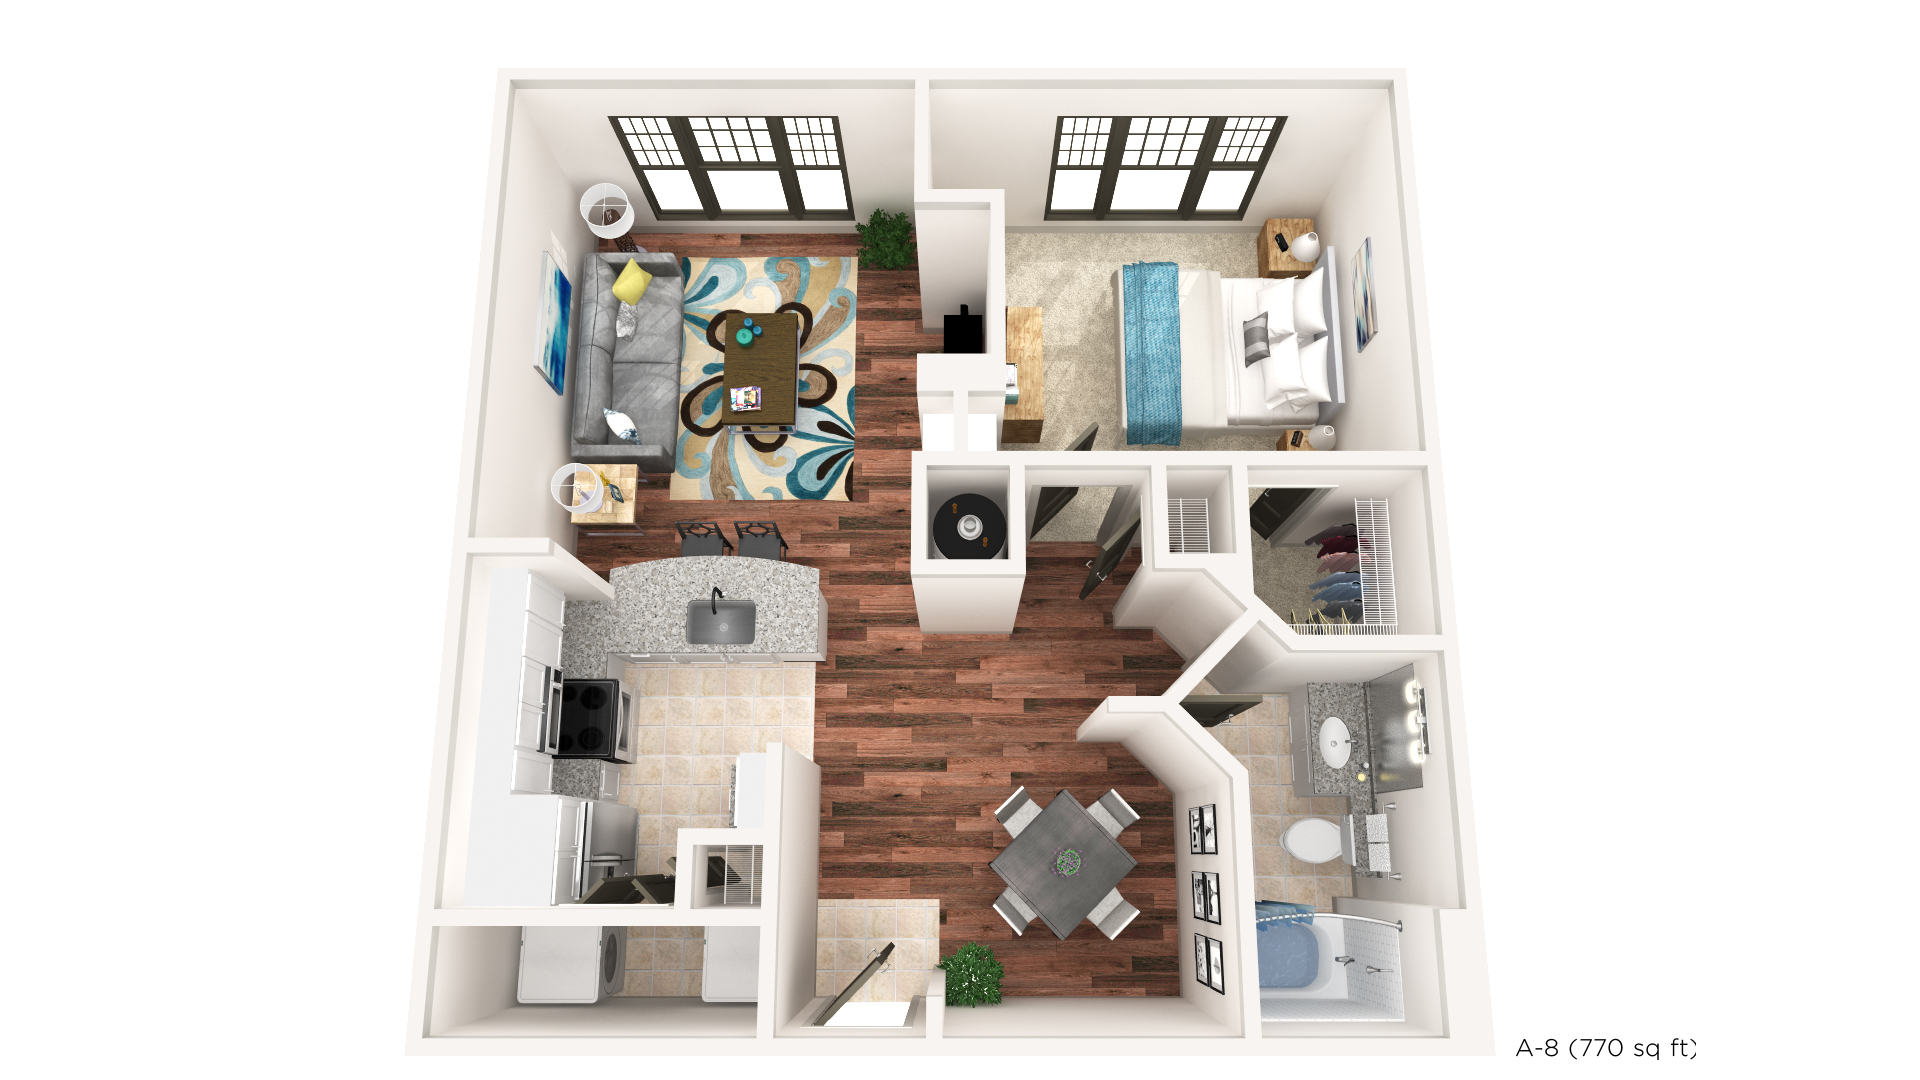 Brookleigh Flats Luxury Apartment Homes - Apartment 1509